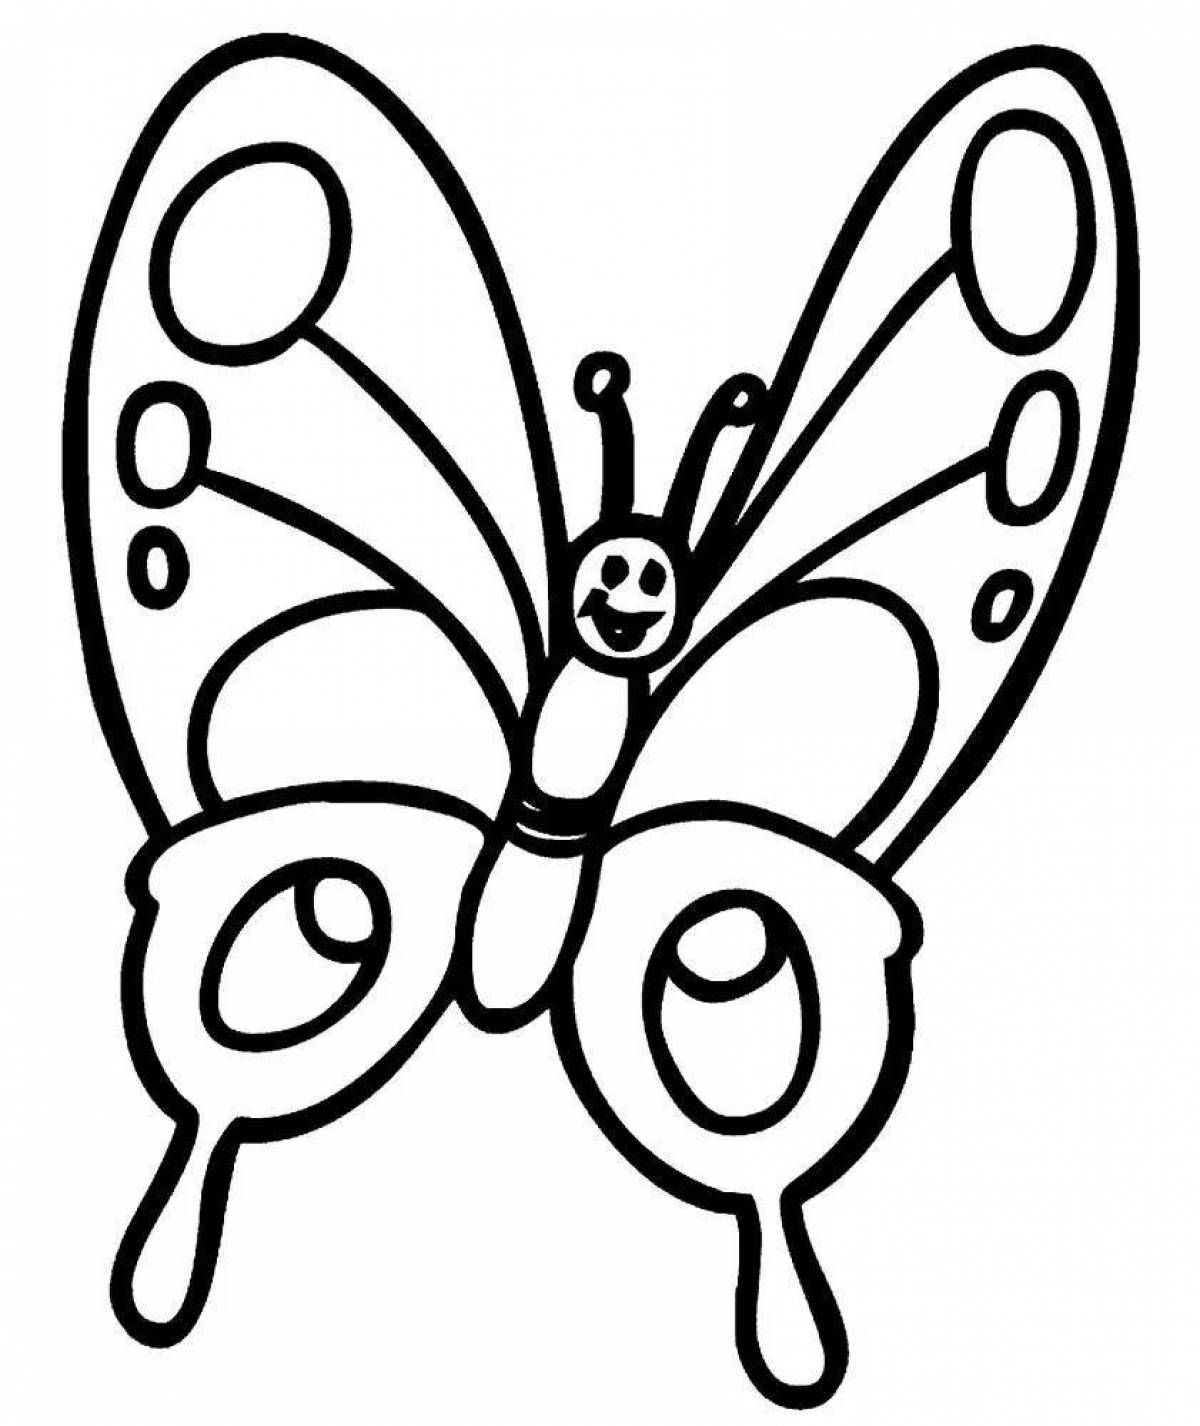 Coloring book shining butterfly